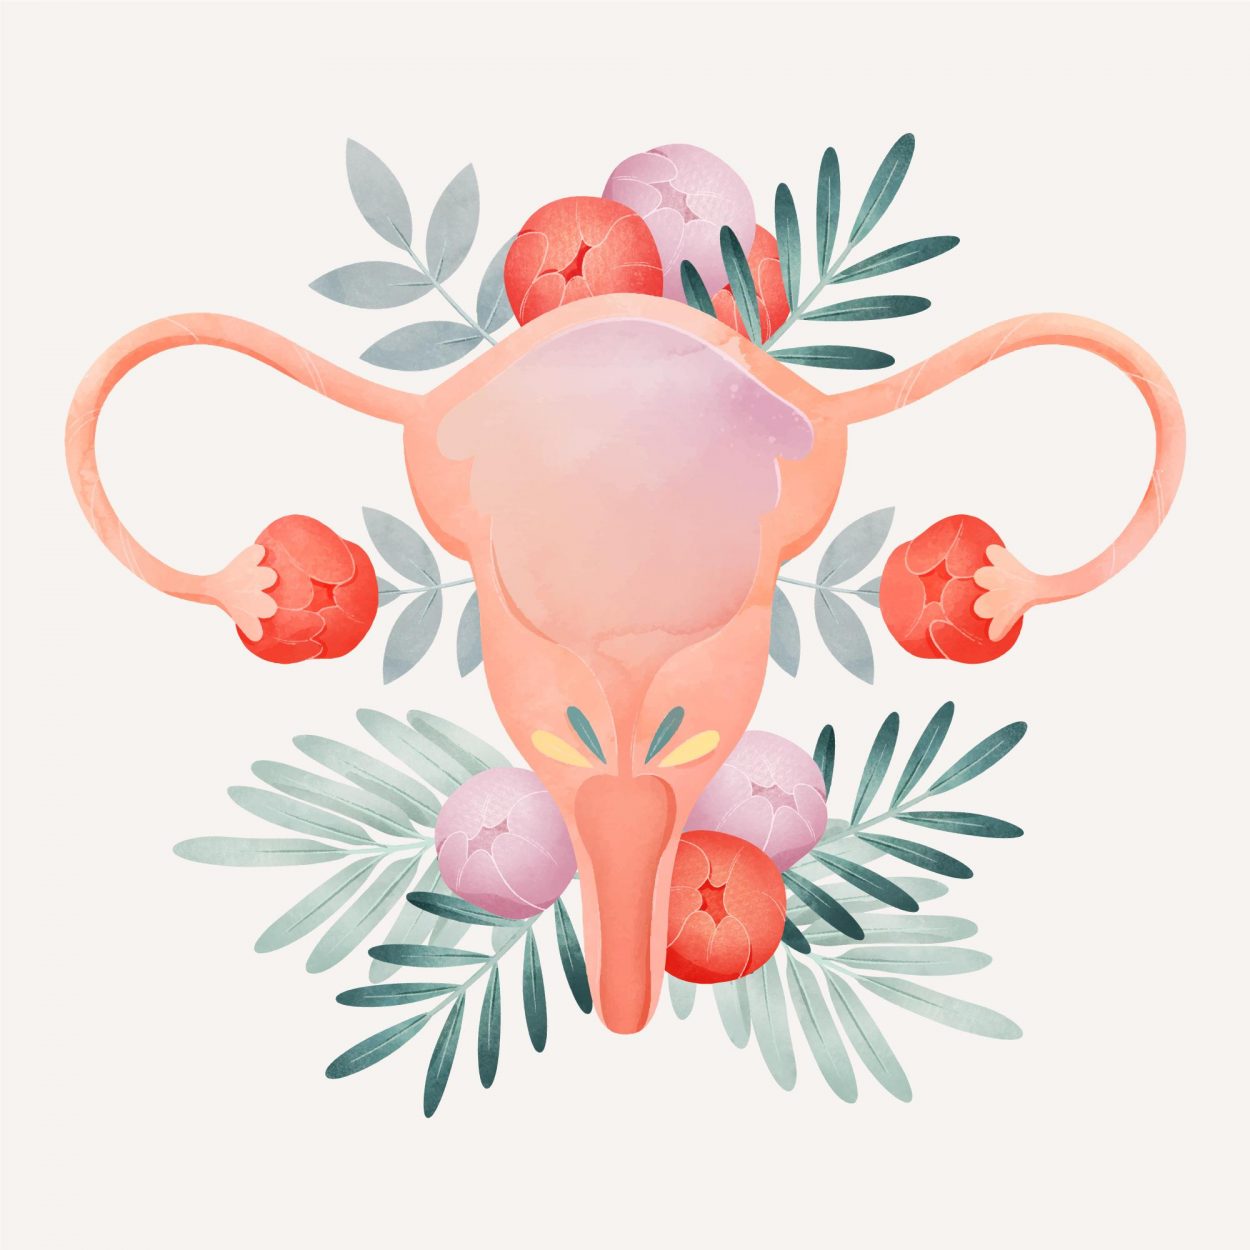 a illustration of the female reproductive organs in an abstract, floral way.